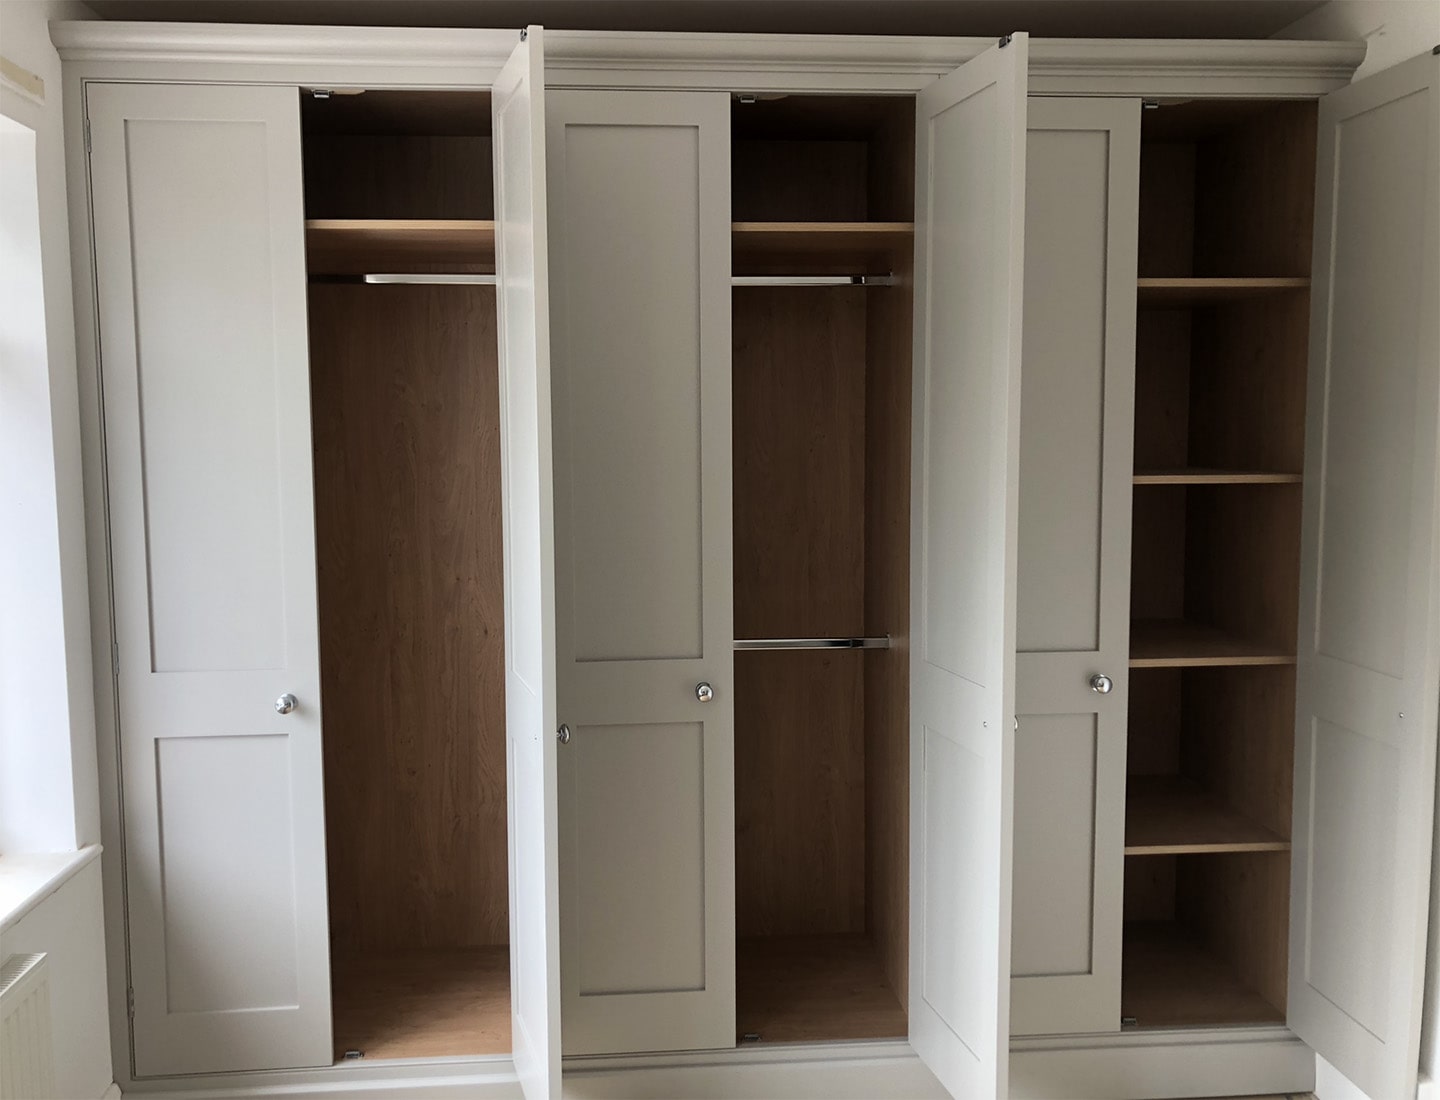 A collection of bespoke wardrobes with their doors open.